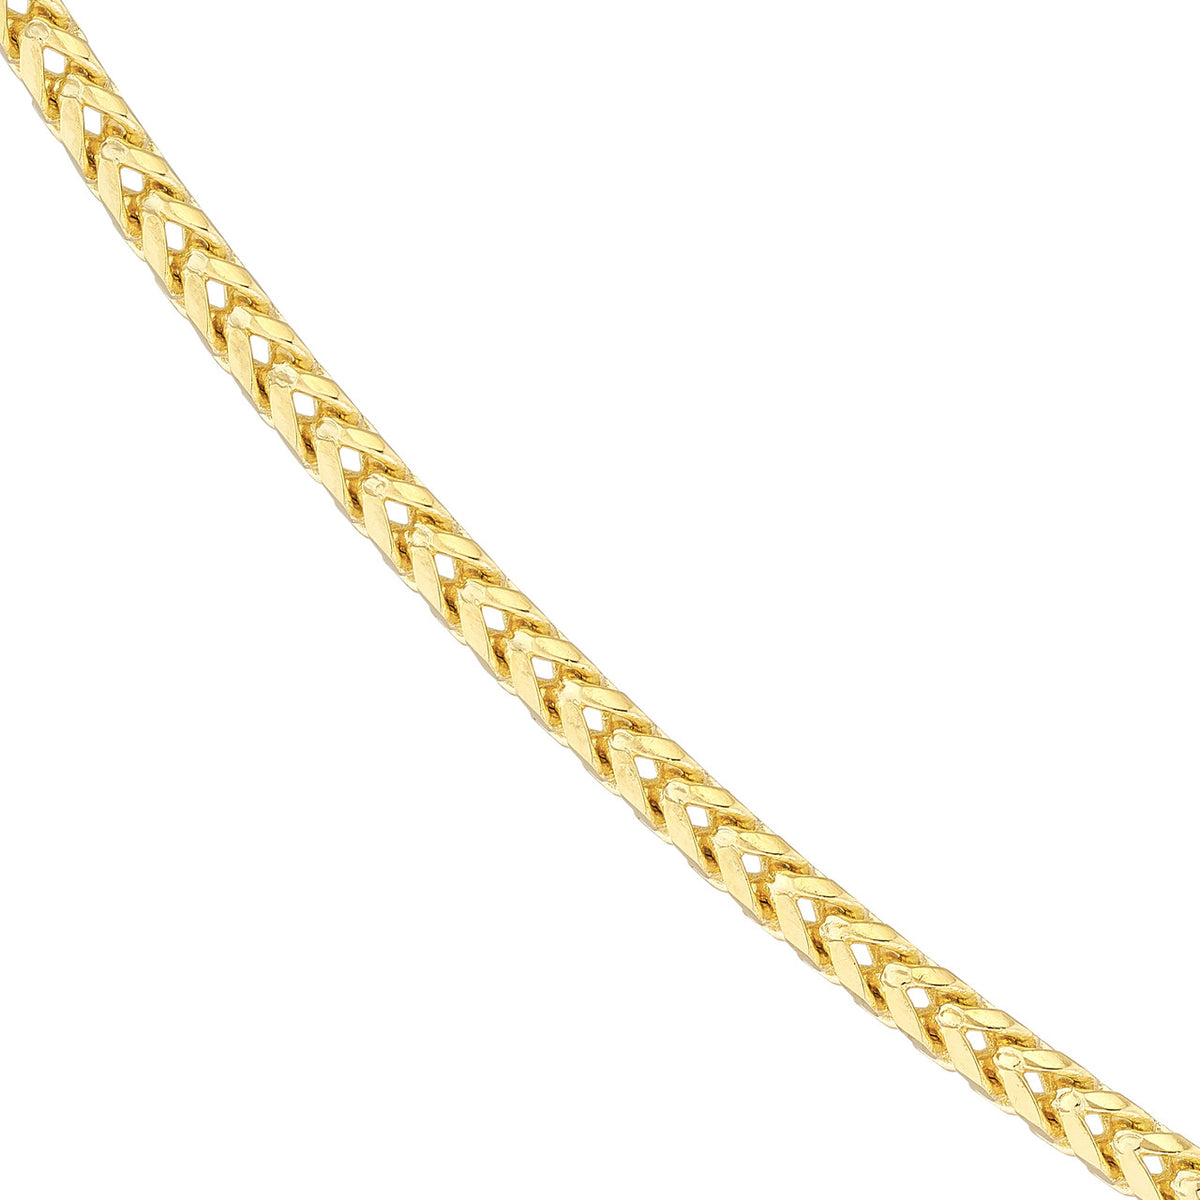 Solid 14K Gold 2.5mm Franco Chain Necklace with Lobster Lock